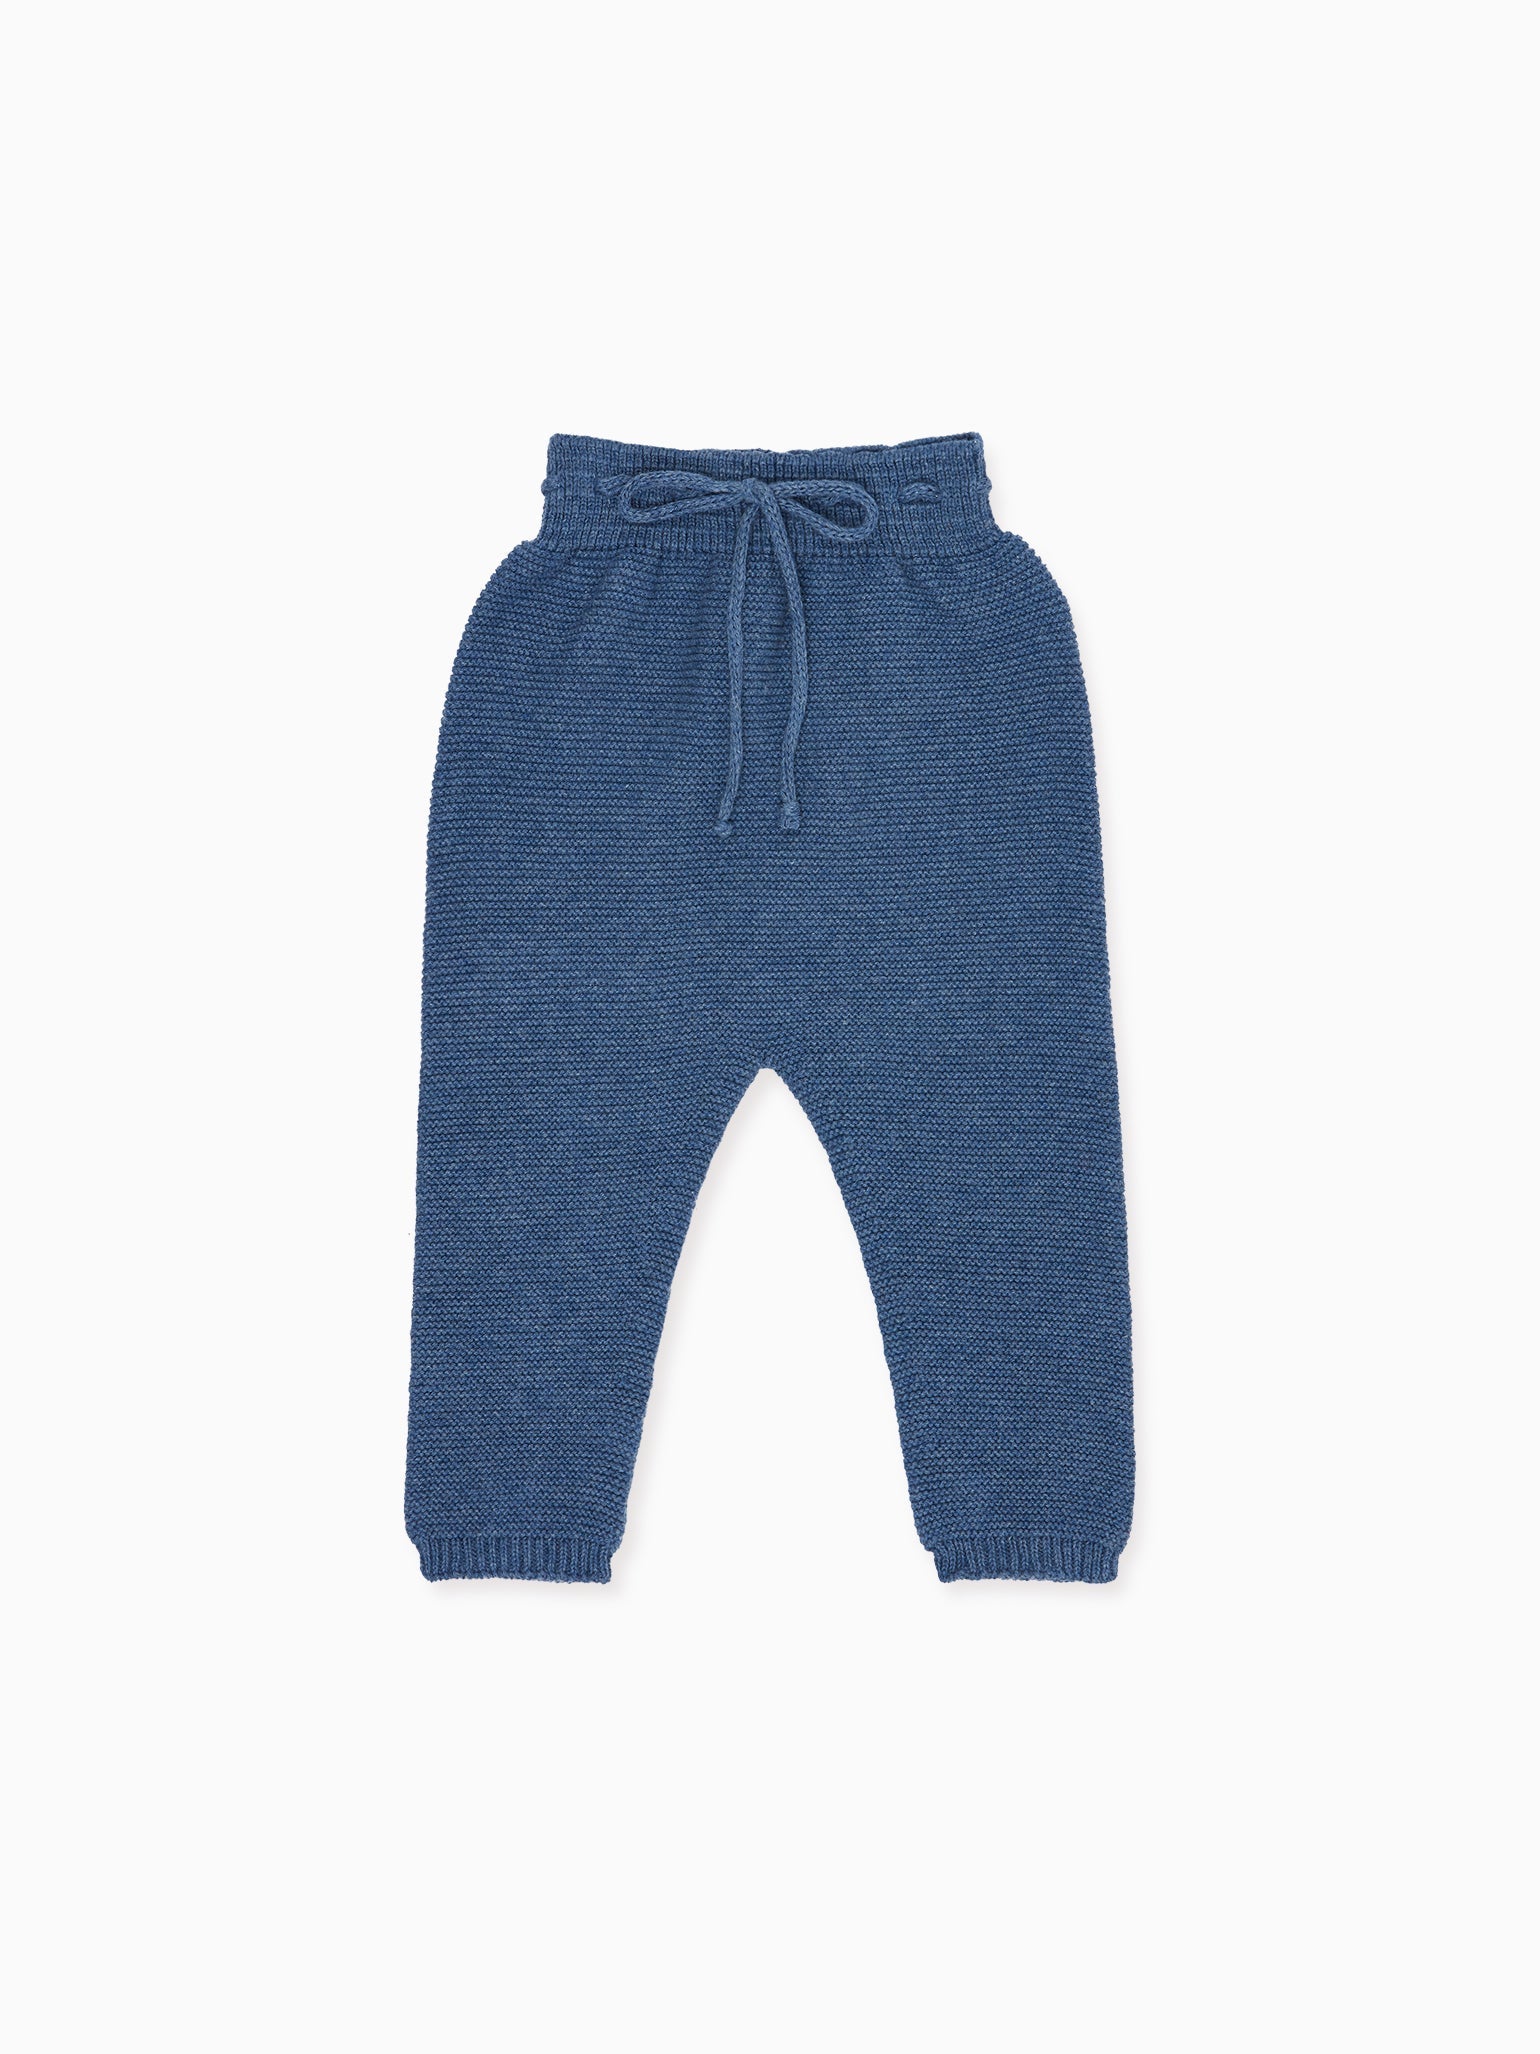 Dark Blue Fino Cotton Baby Knitted Pants